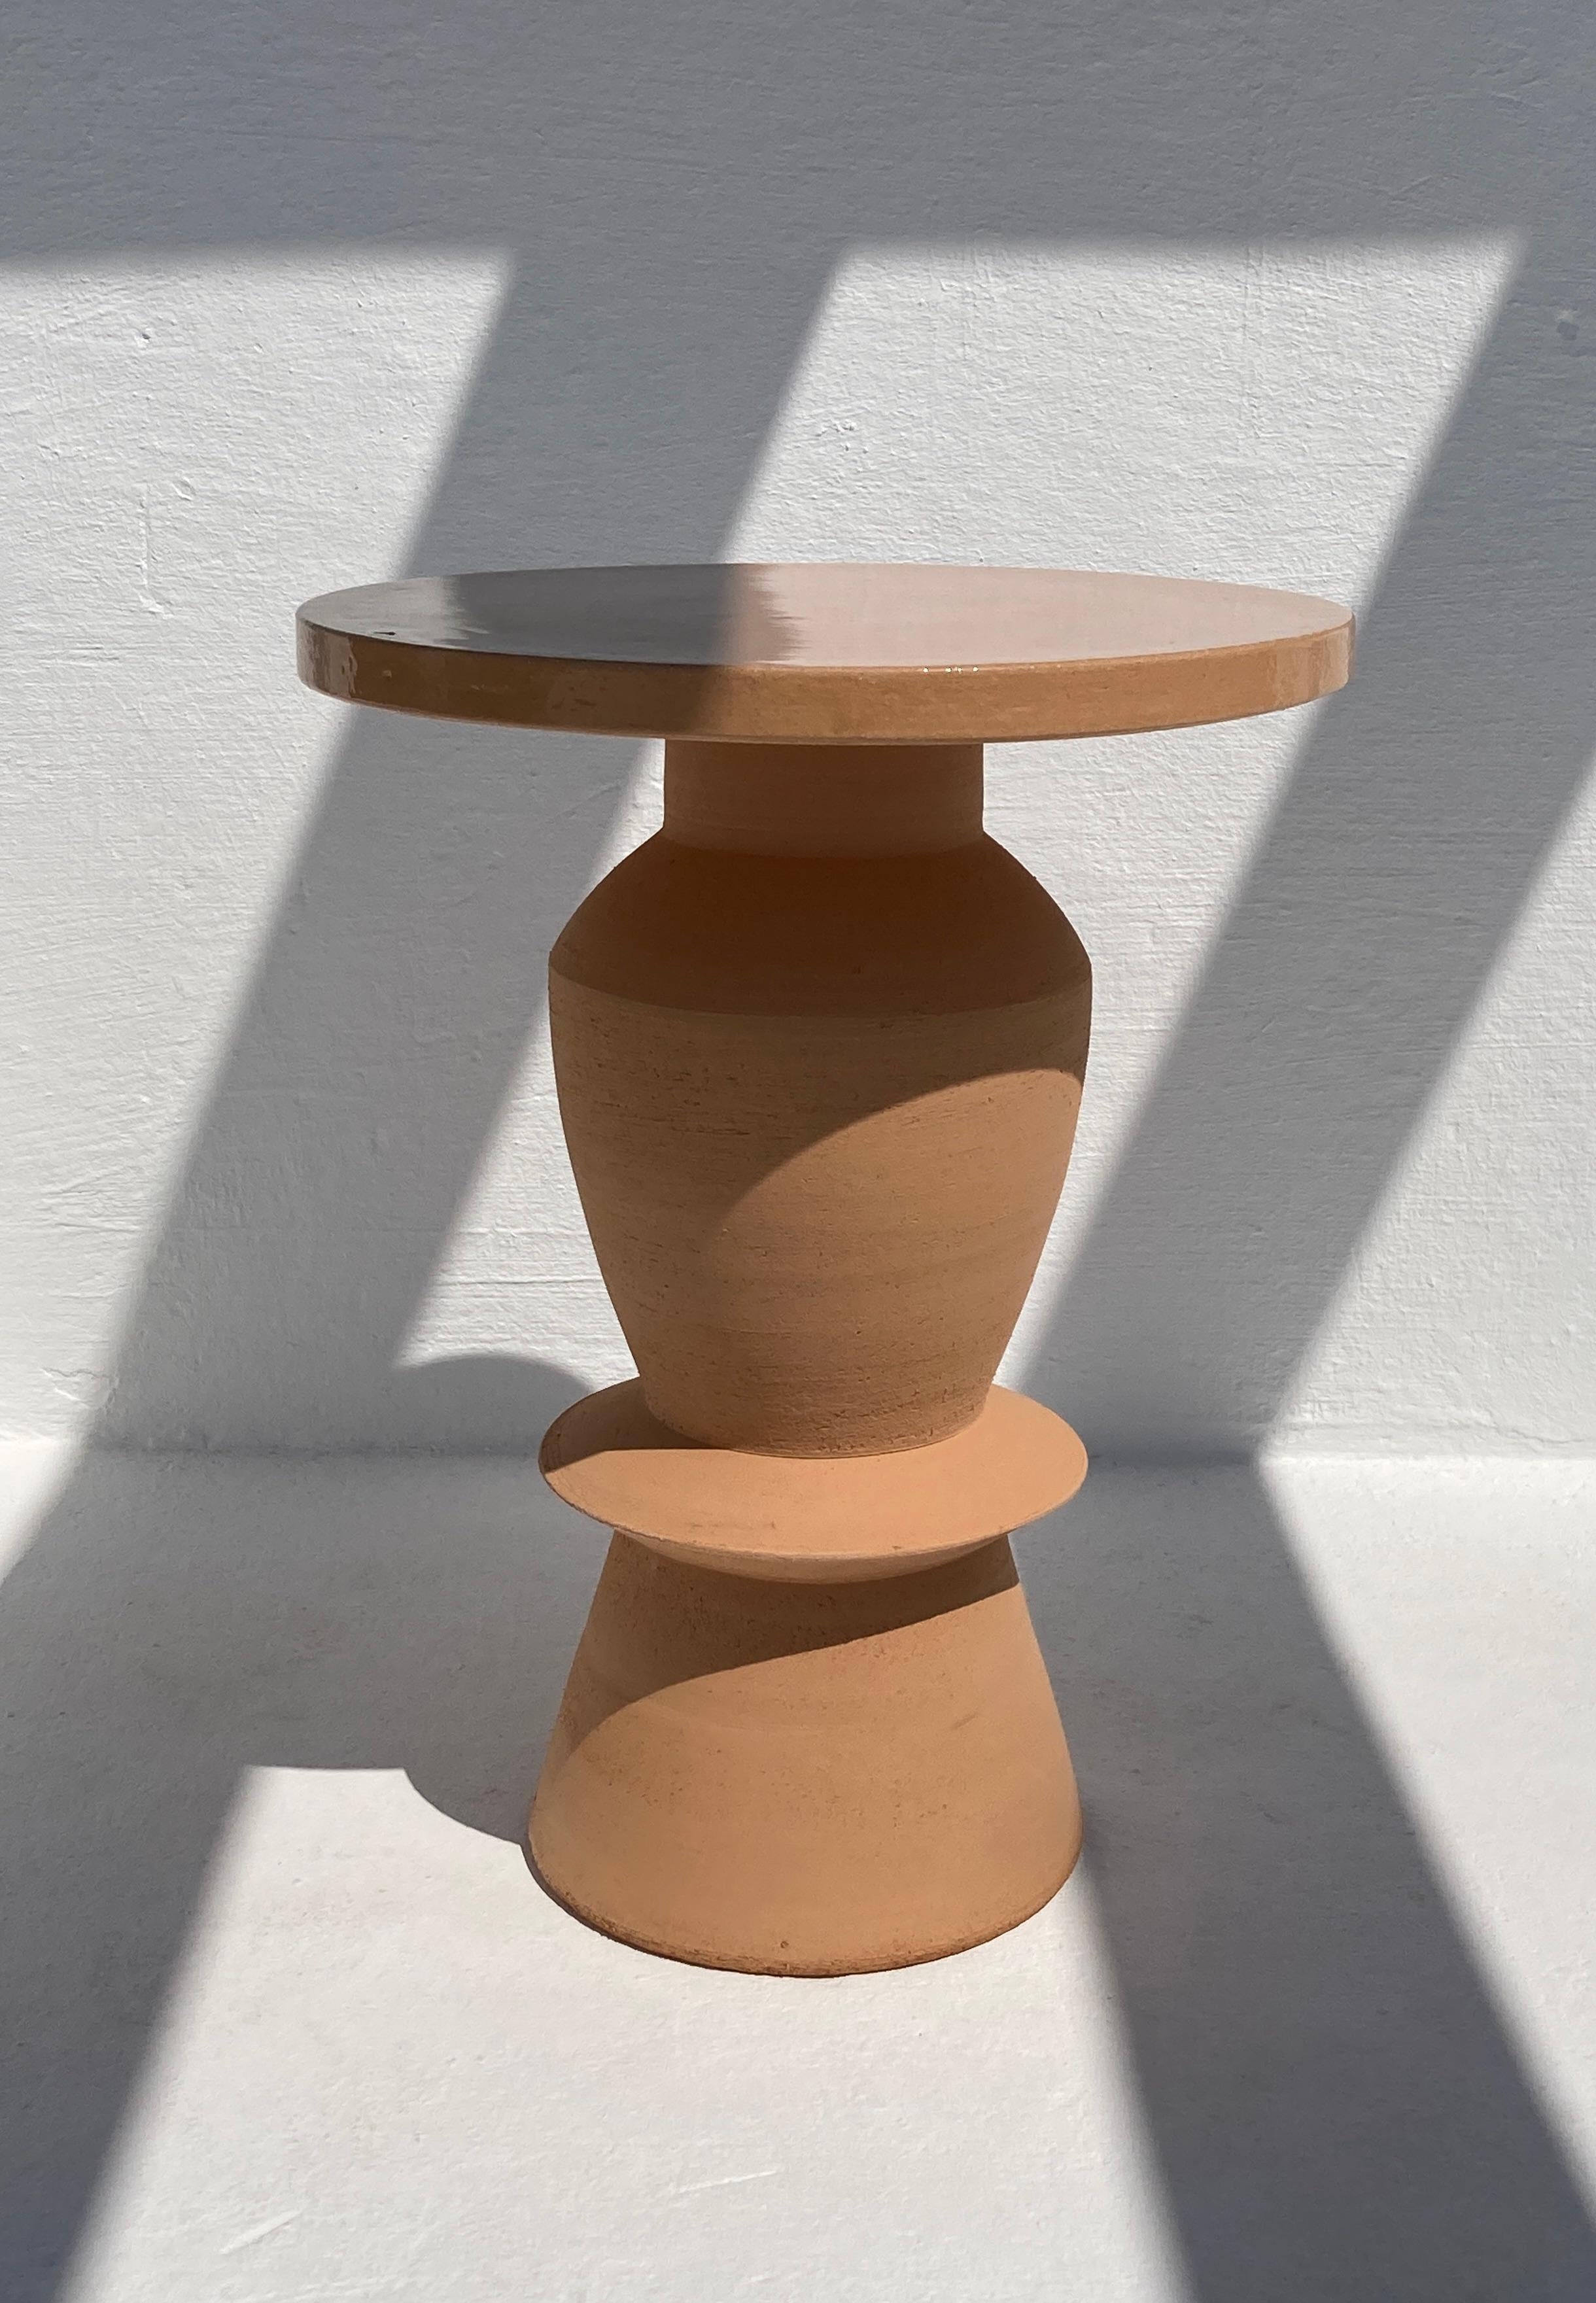 Terracotta union side table by Lea Ginac
Unique Piece. 
Dimensions: Diameter 40 x Height 47 cm 
Materials: Terracotta Chamotte Clay. Handmade Ceramic. 
Technique: Hand-modeling.
Available in three other designs. Also available in White.